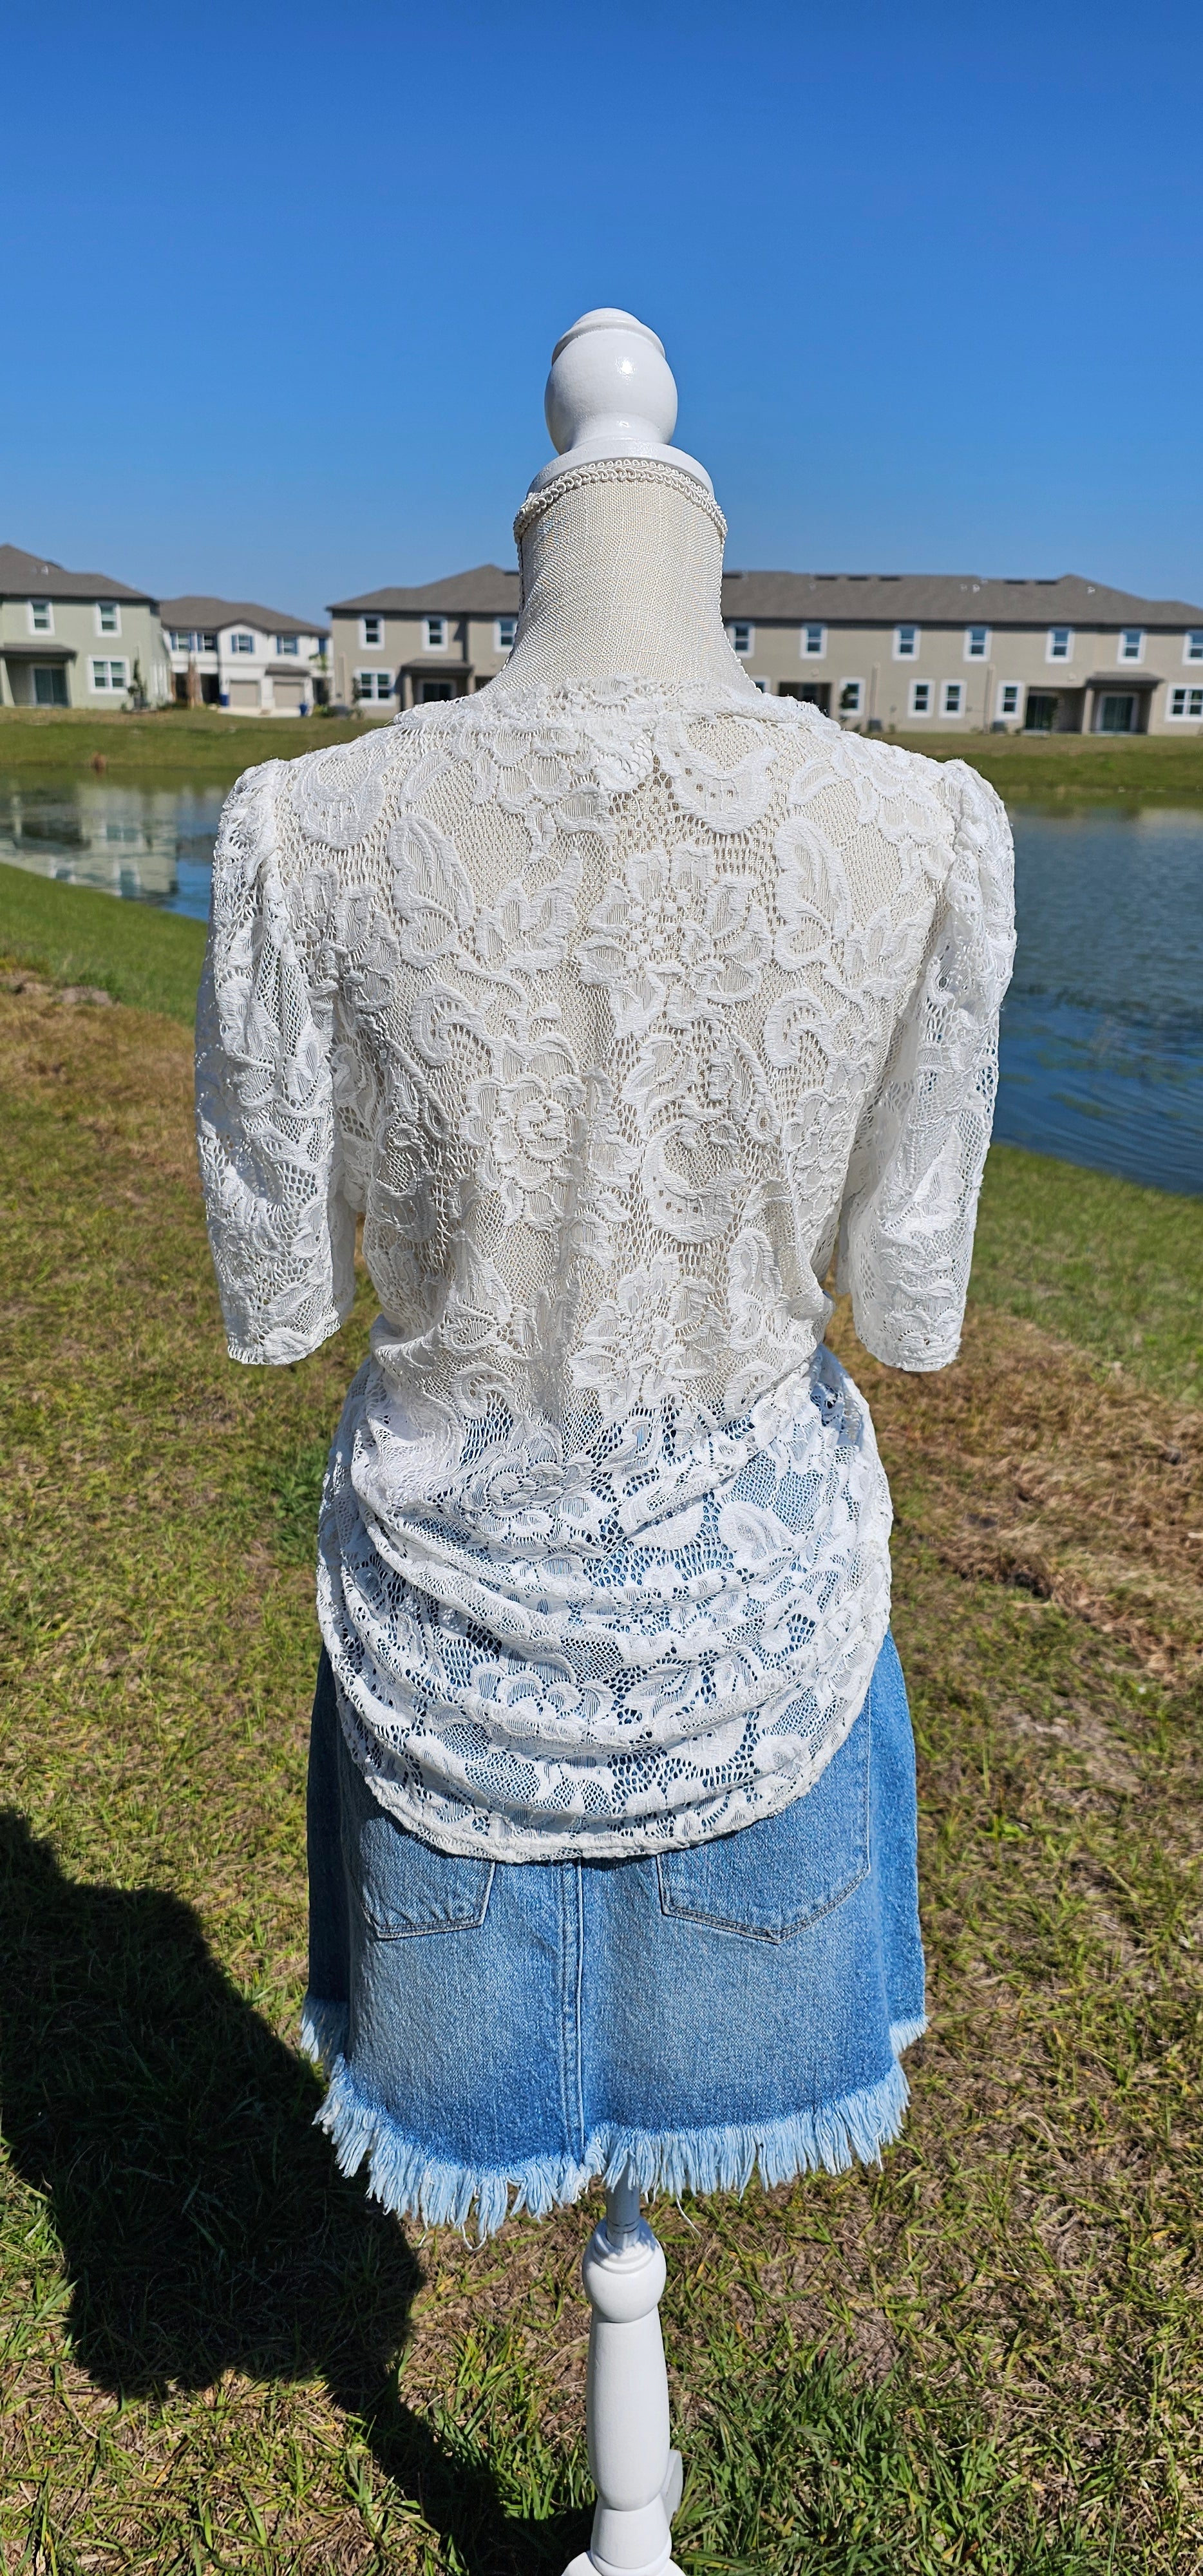 “All About The Lace” is a gorgeous white lace top. This is a short sleeve shirt, featuring floral lace print, bubble sleeves, rounded neckline and hemline. It does have stretch! Pair with your favorite cami or bralette. Sizes small through large.